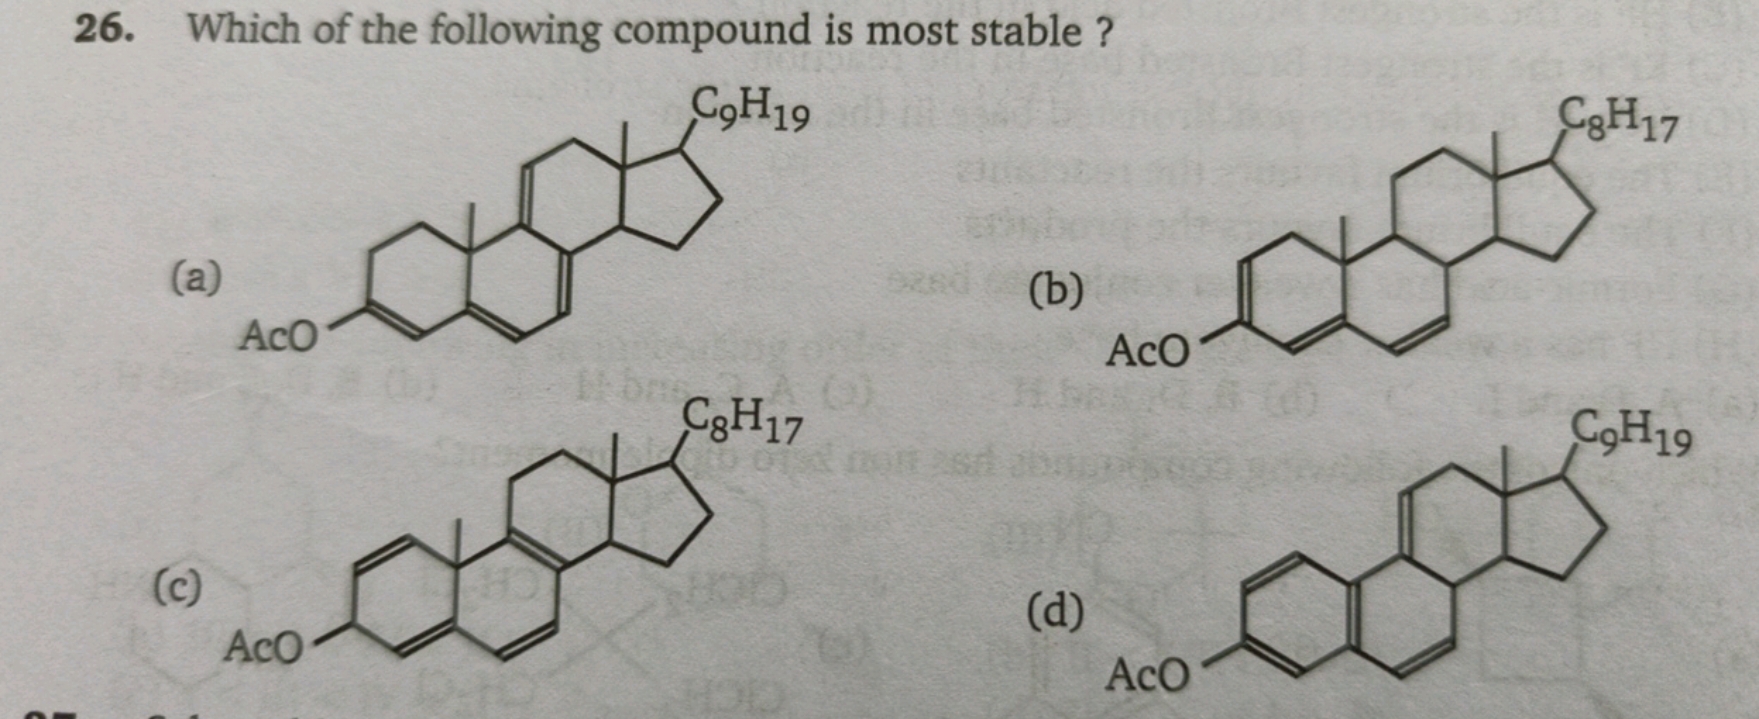 26. Which of the following compound is most stable?
(a)
CCCCCCCCC1CCC2